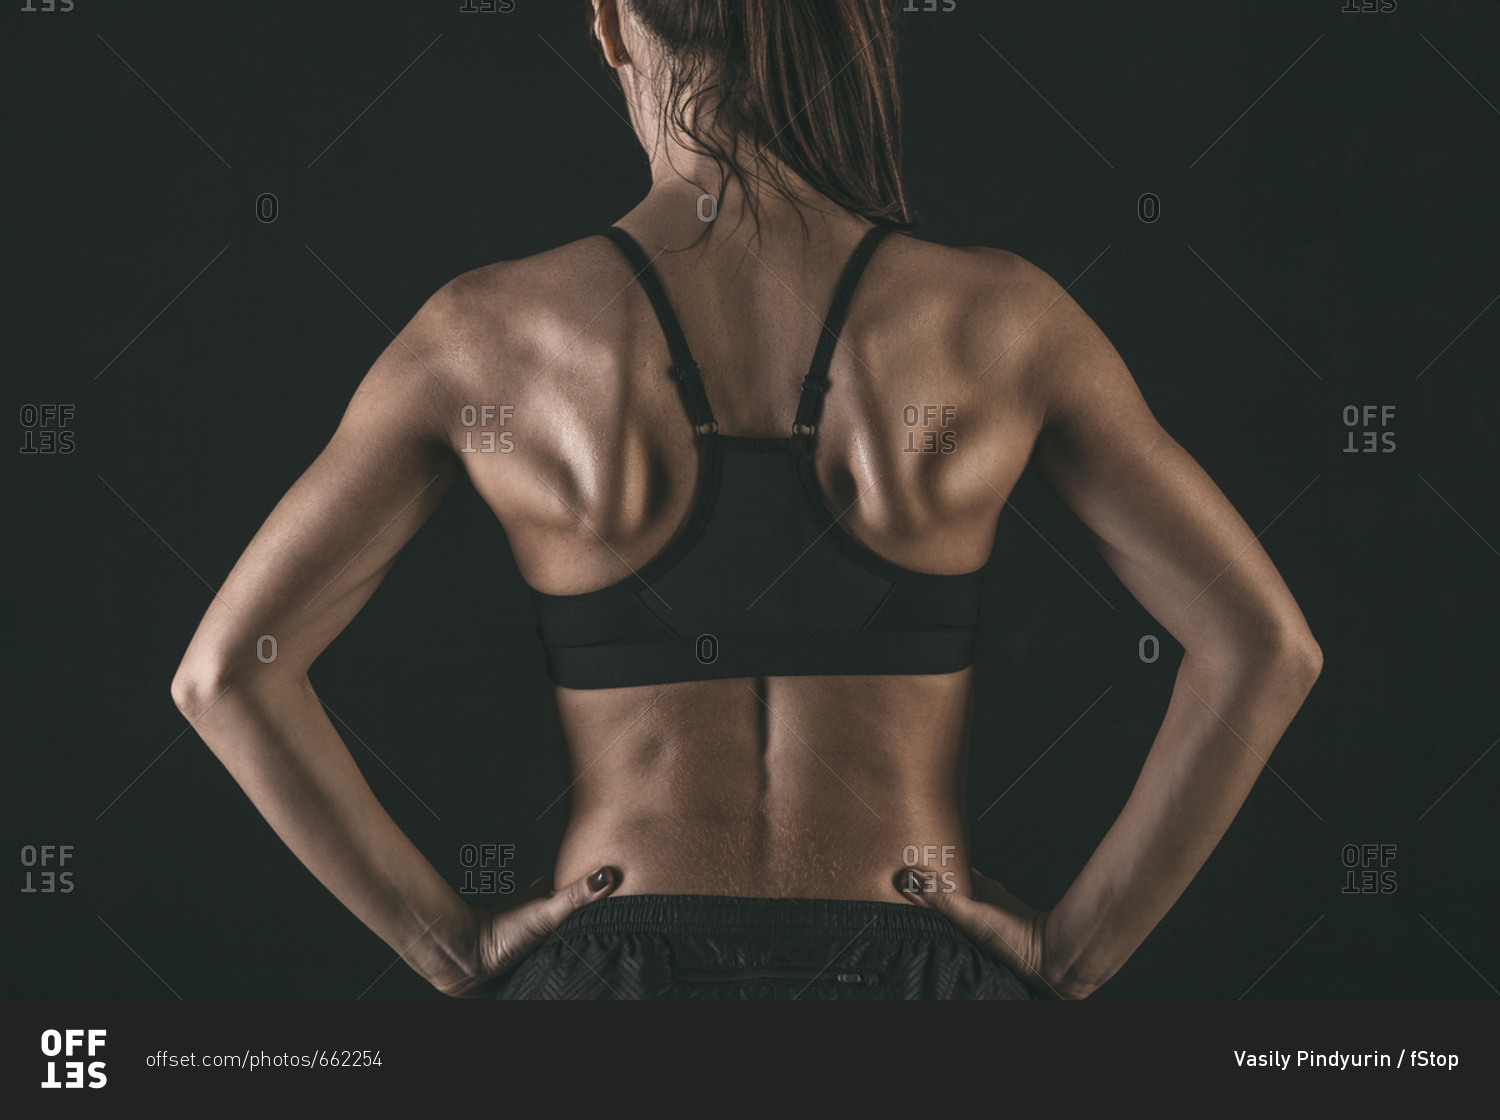 Rear view of female athlete wearing sports bra standing with hands on hip against black background